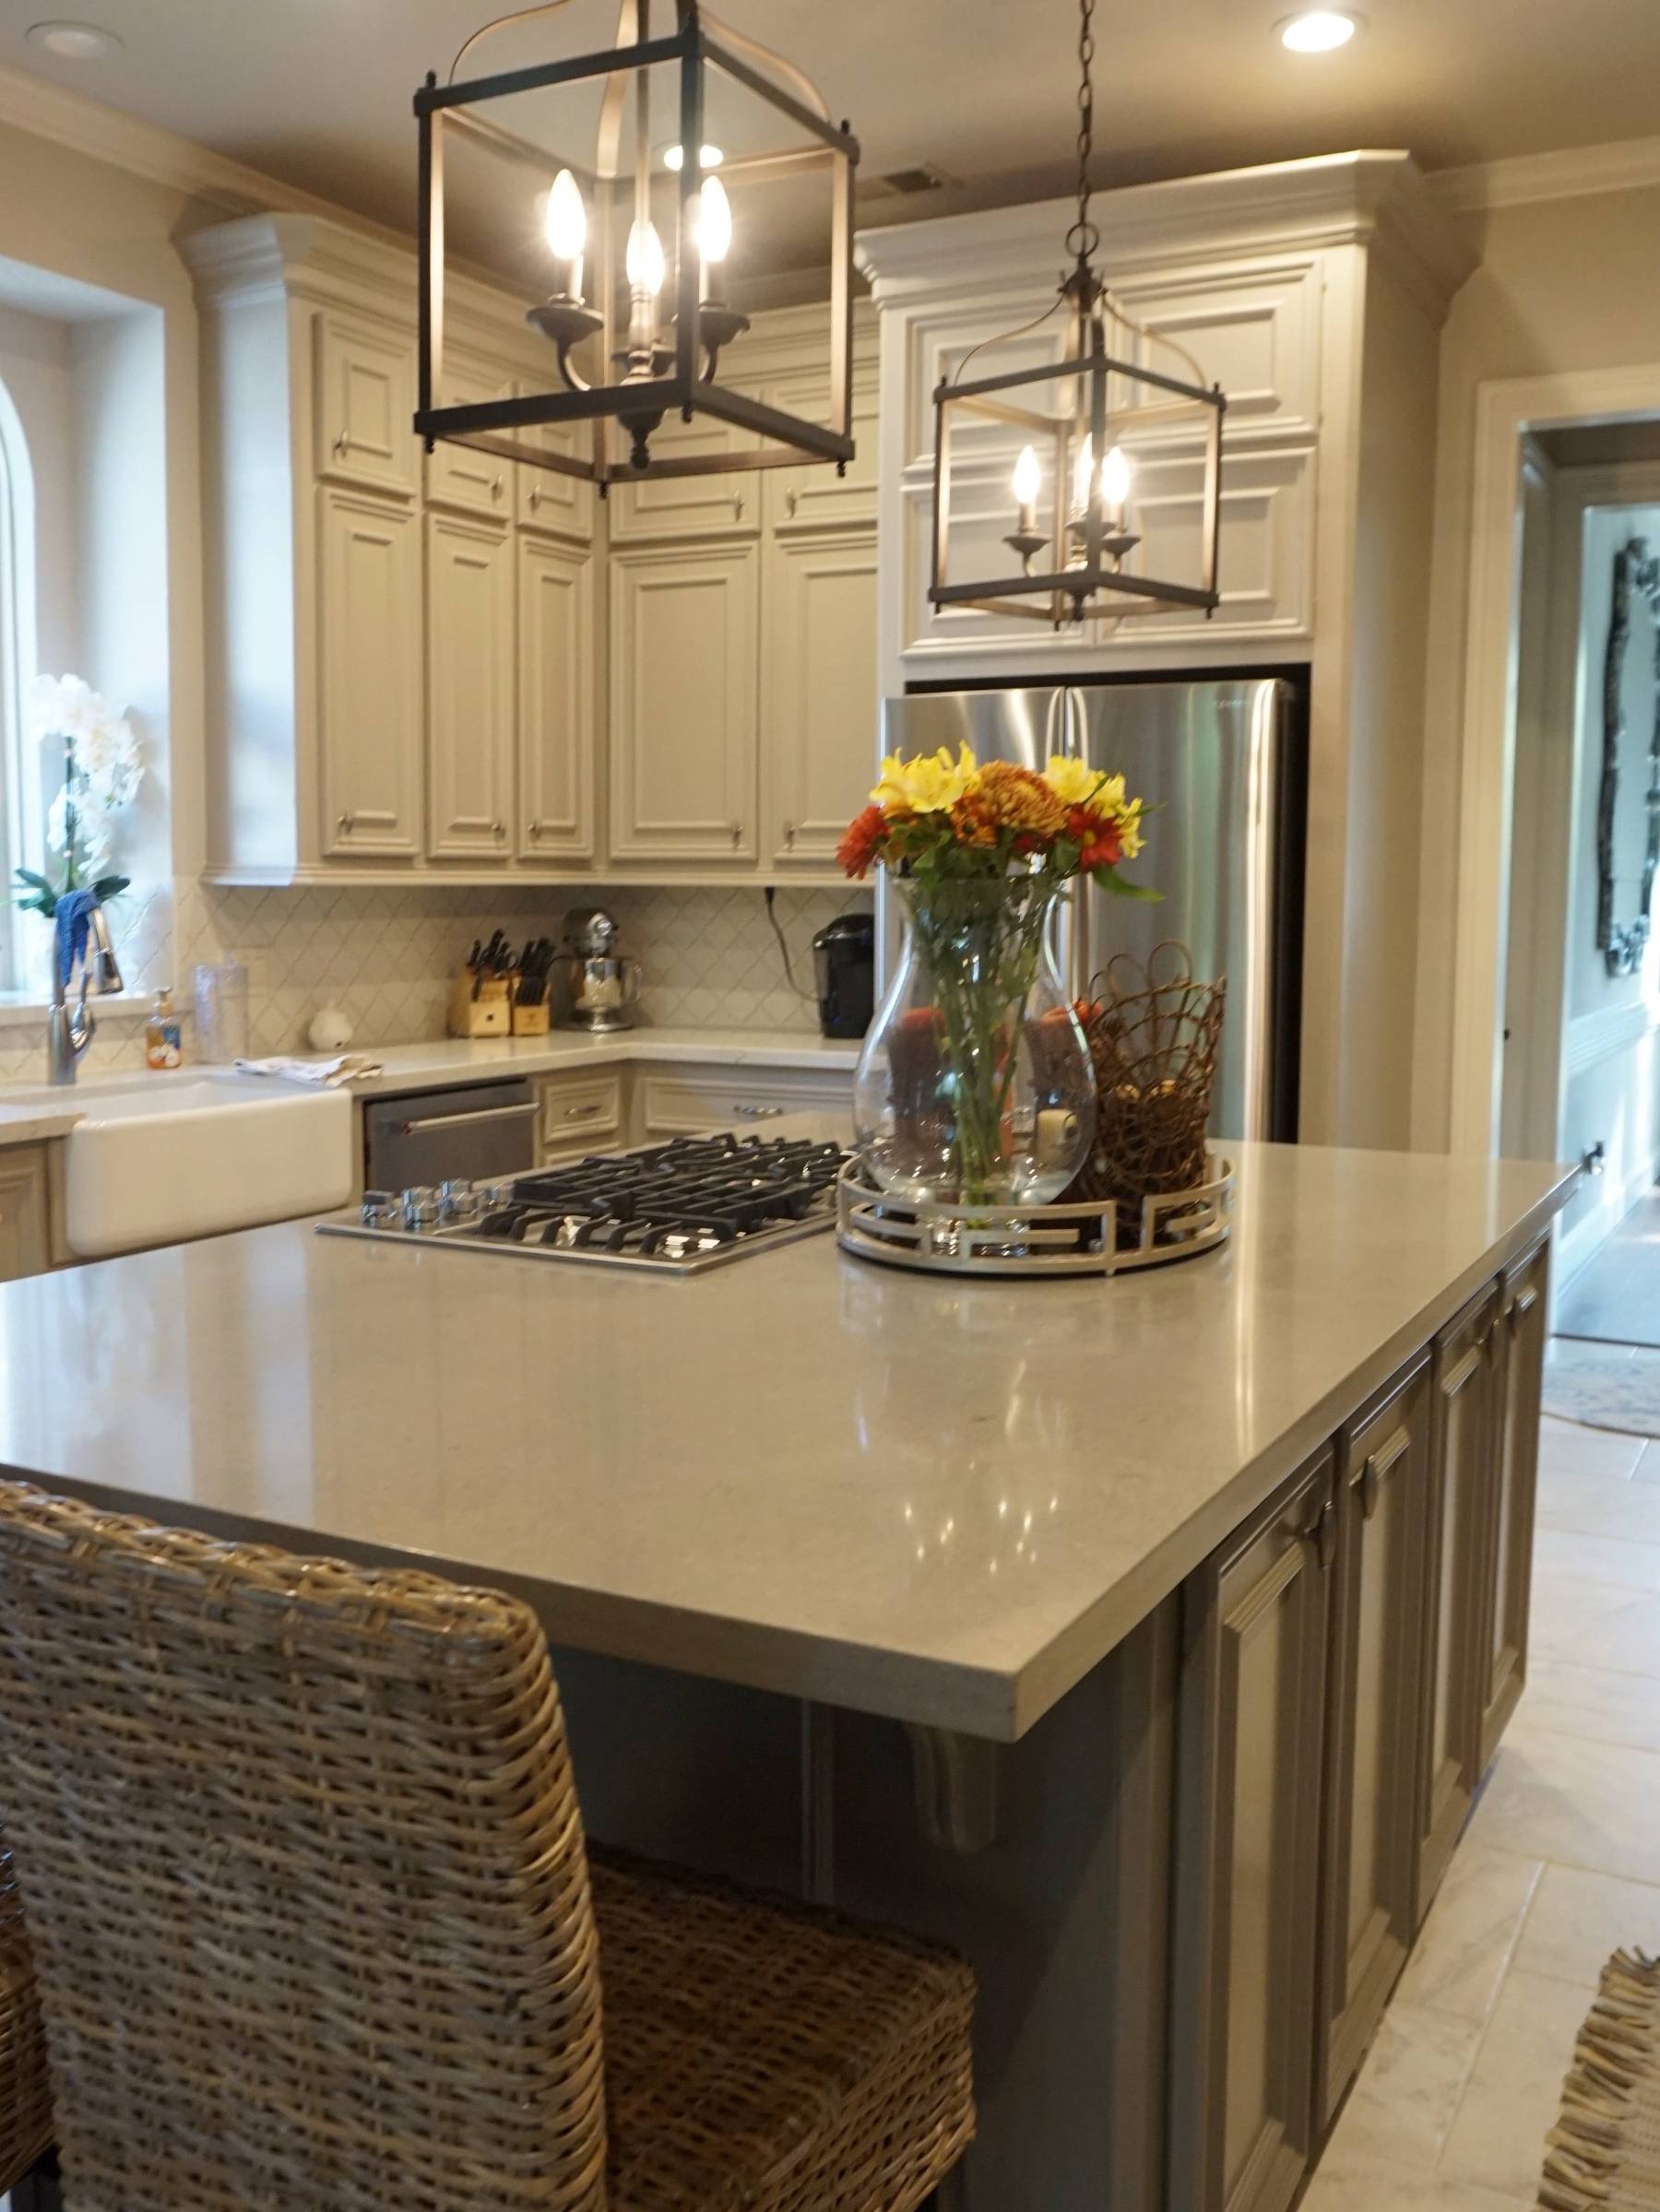 A kitchen scene featuring an island with quartz countertop and tile backsplash and flooring.